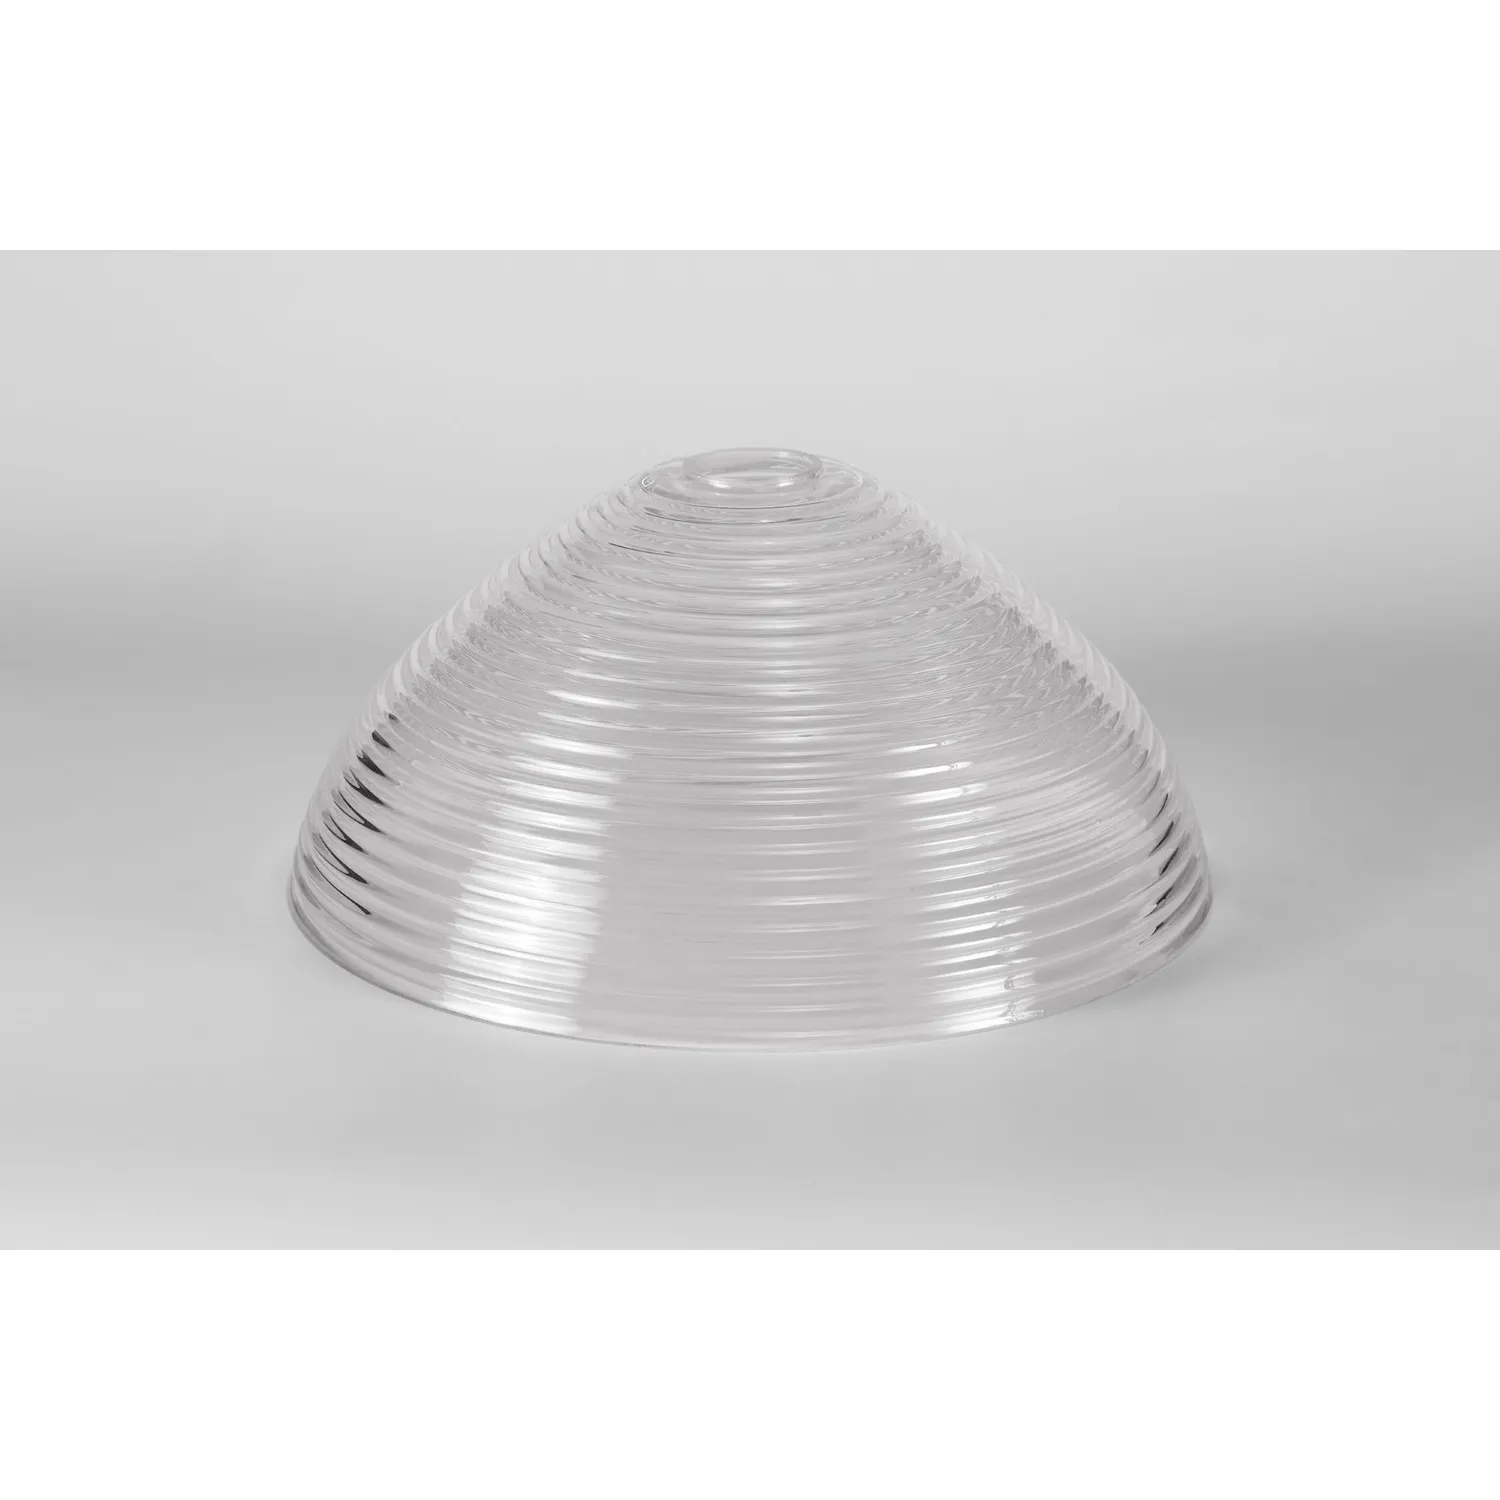 Sandy Round 33.5cm Prismatic Effect Clear Glass (G), Lampshade